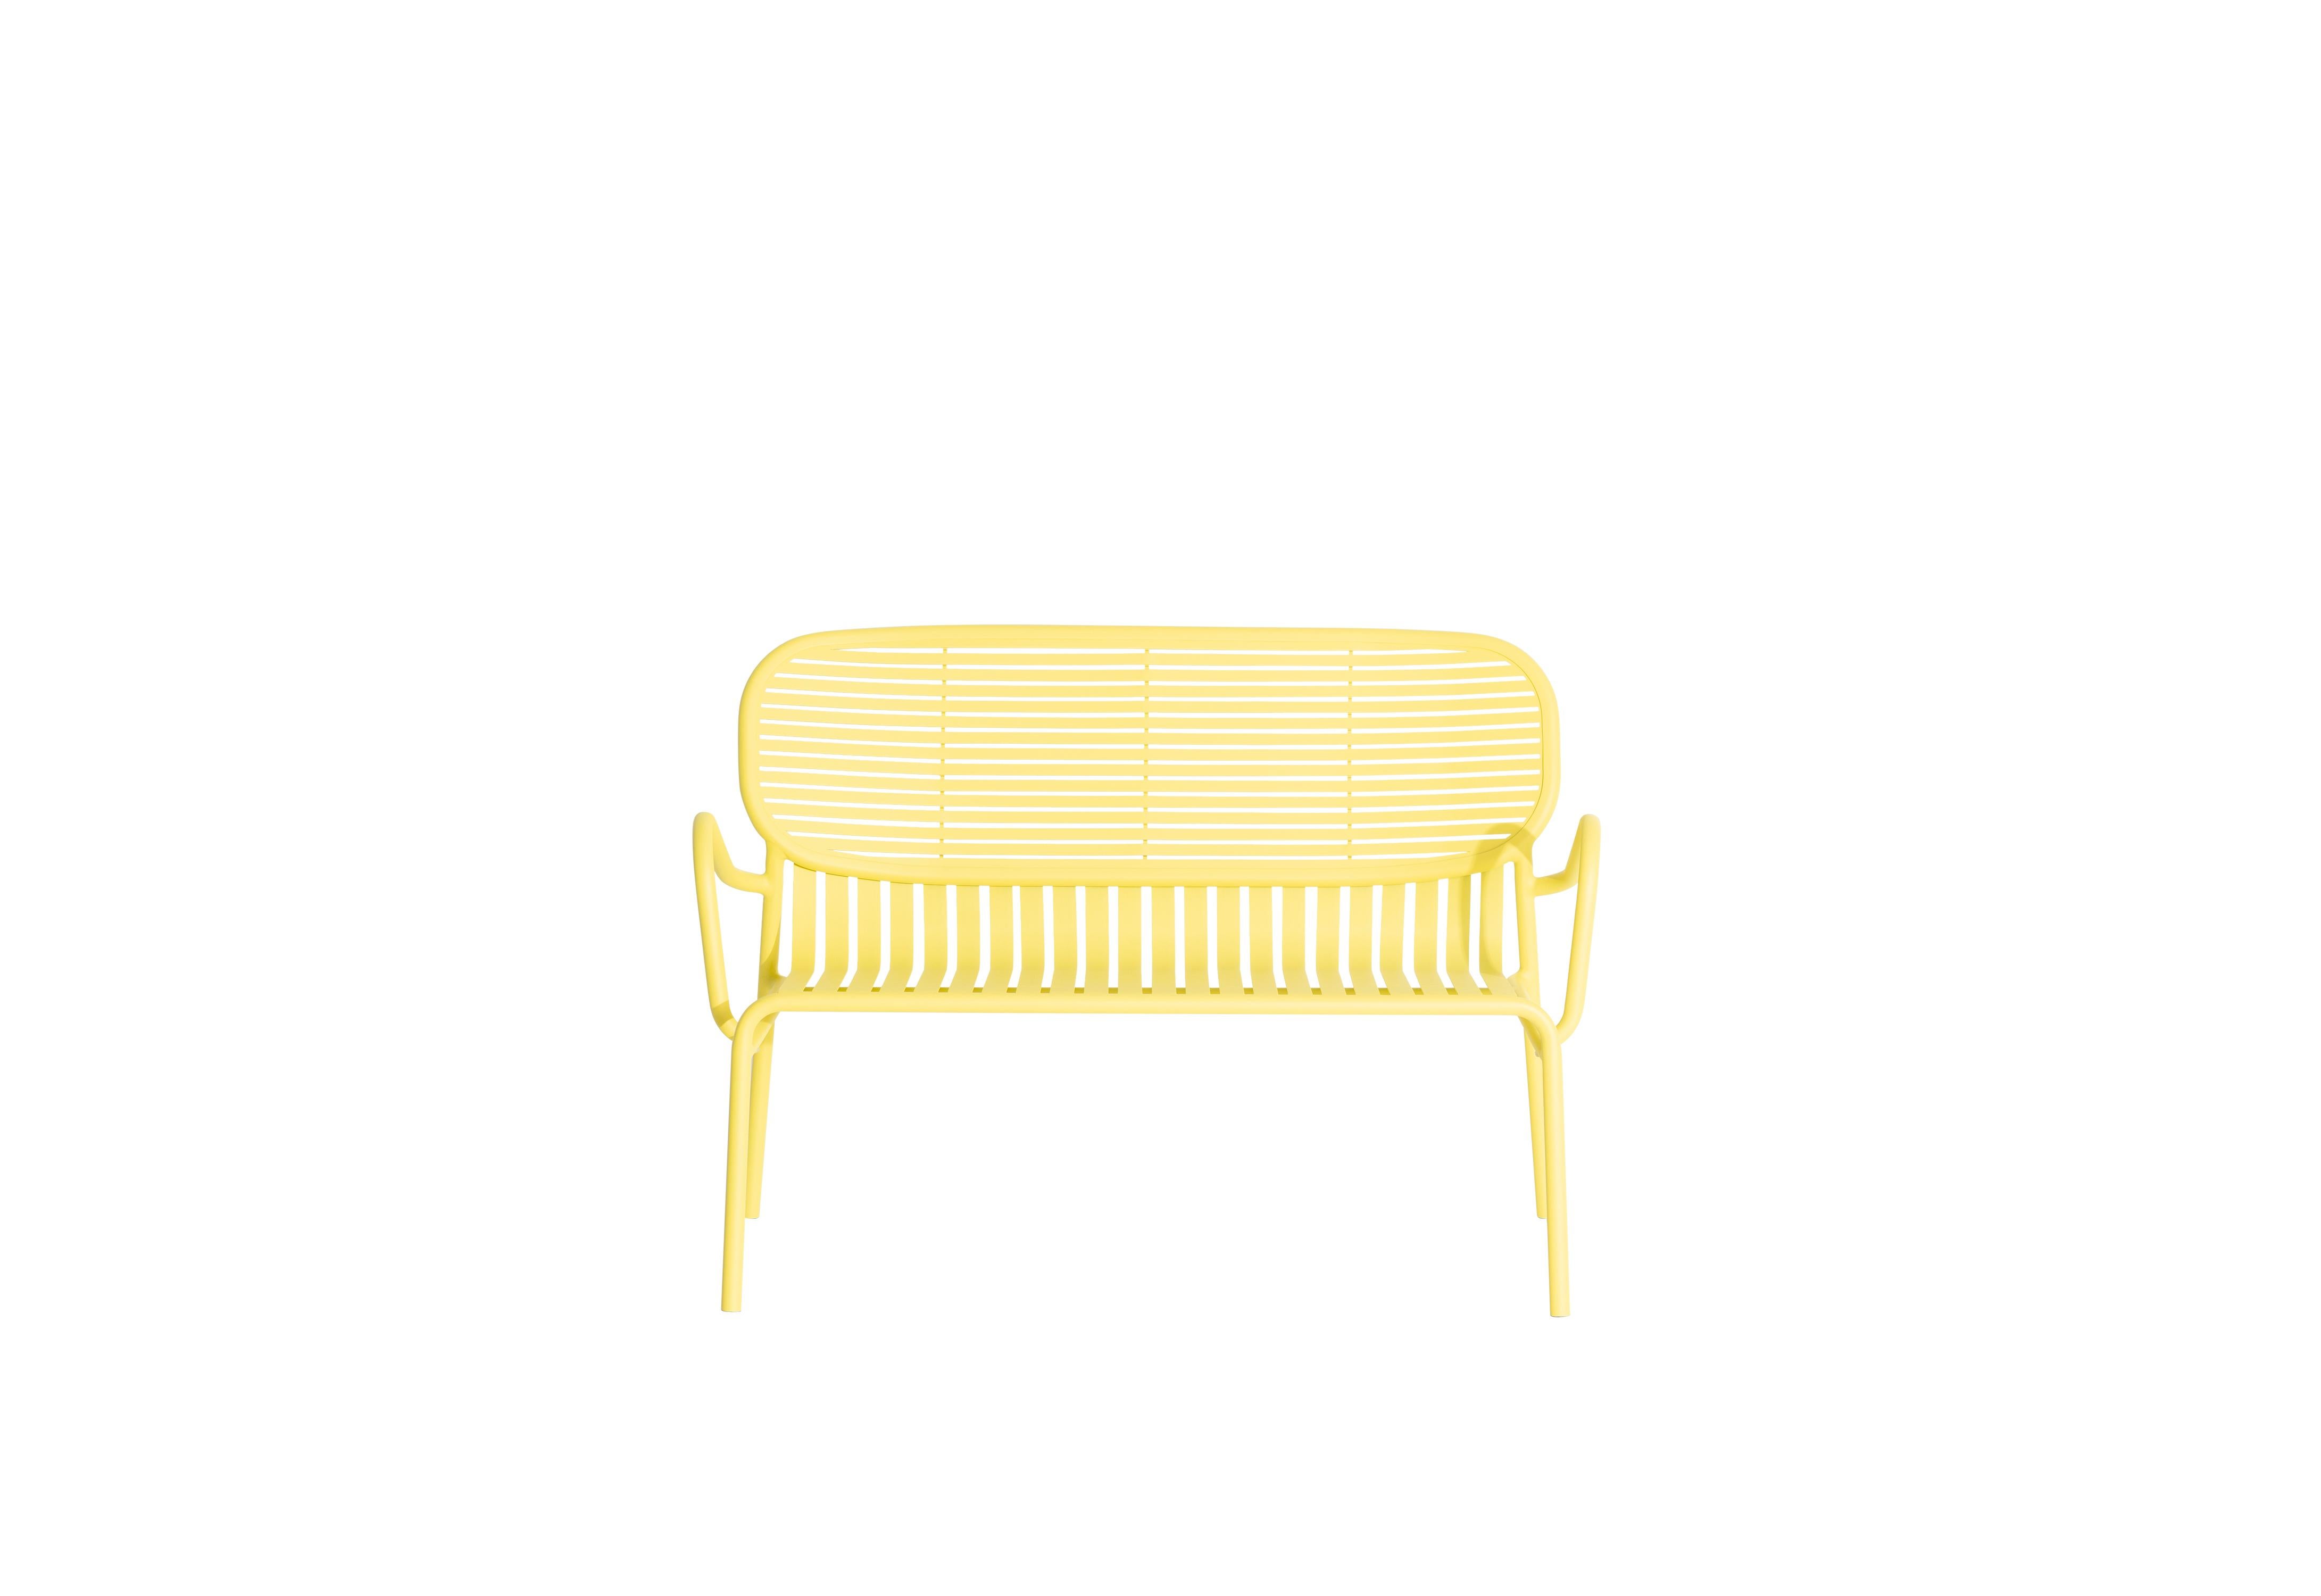 Petite Friture Week-End Sofa in Yellow Aluminium by Studio BrichetZiegler, 2017

The week-end collection is a full range of outdoor furniture, in aluminium grained epoxy paint, matt finish, that includes 18 functions and 8 colours for the retail